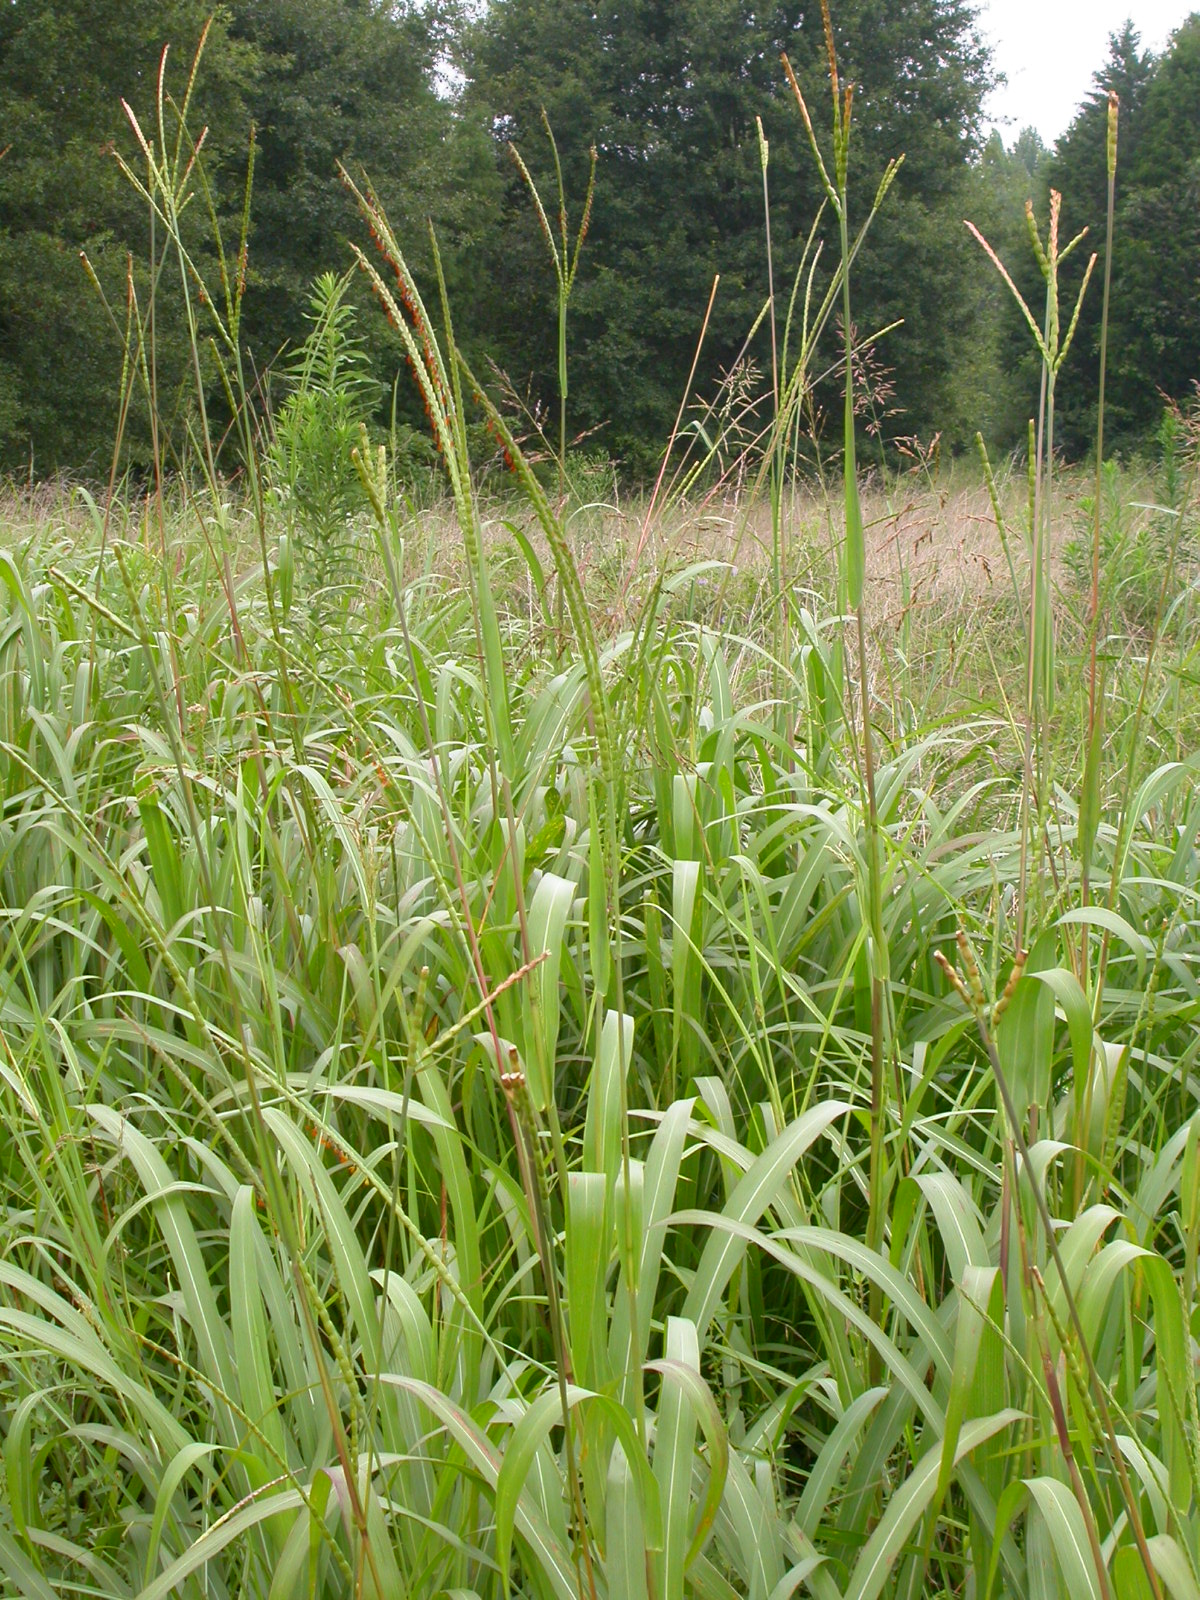 Photograph of eastern gamagrass growing in a field. The photograph shows grasses with tall, branching inflorescences.